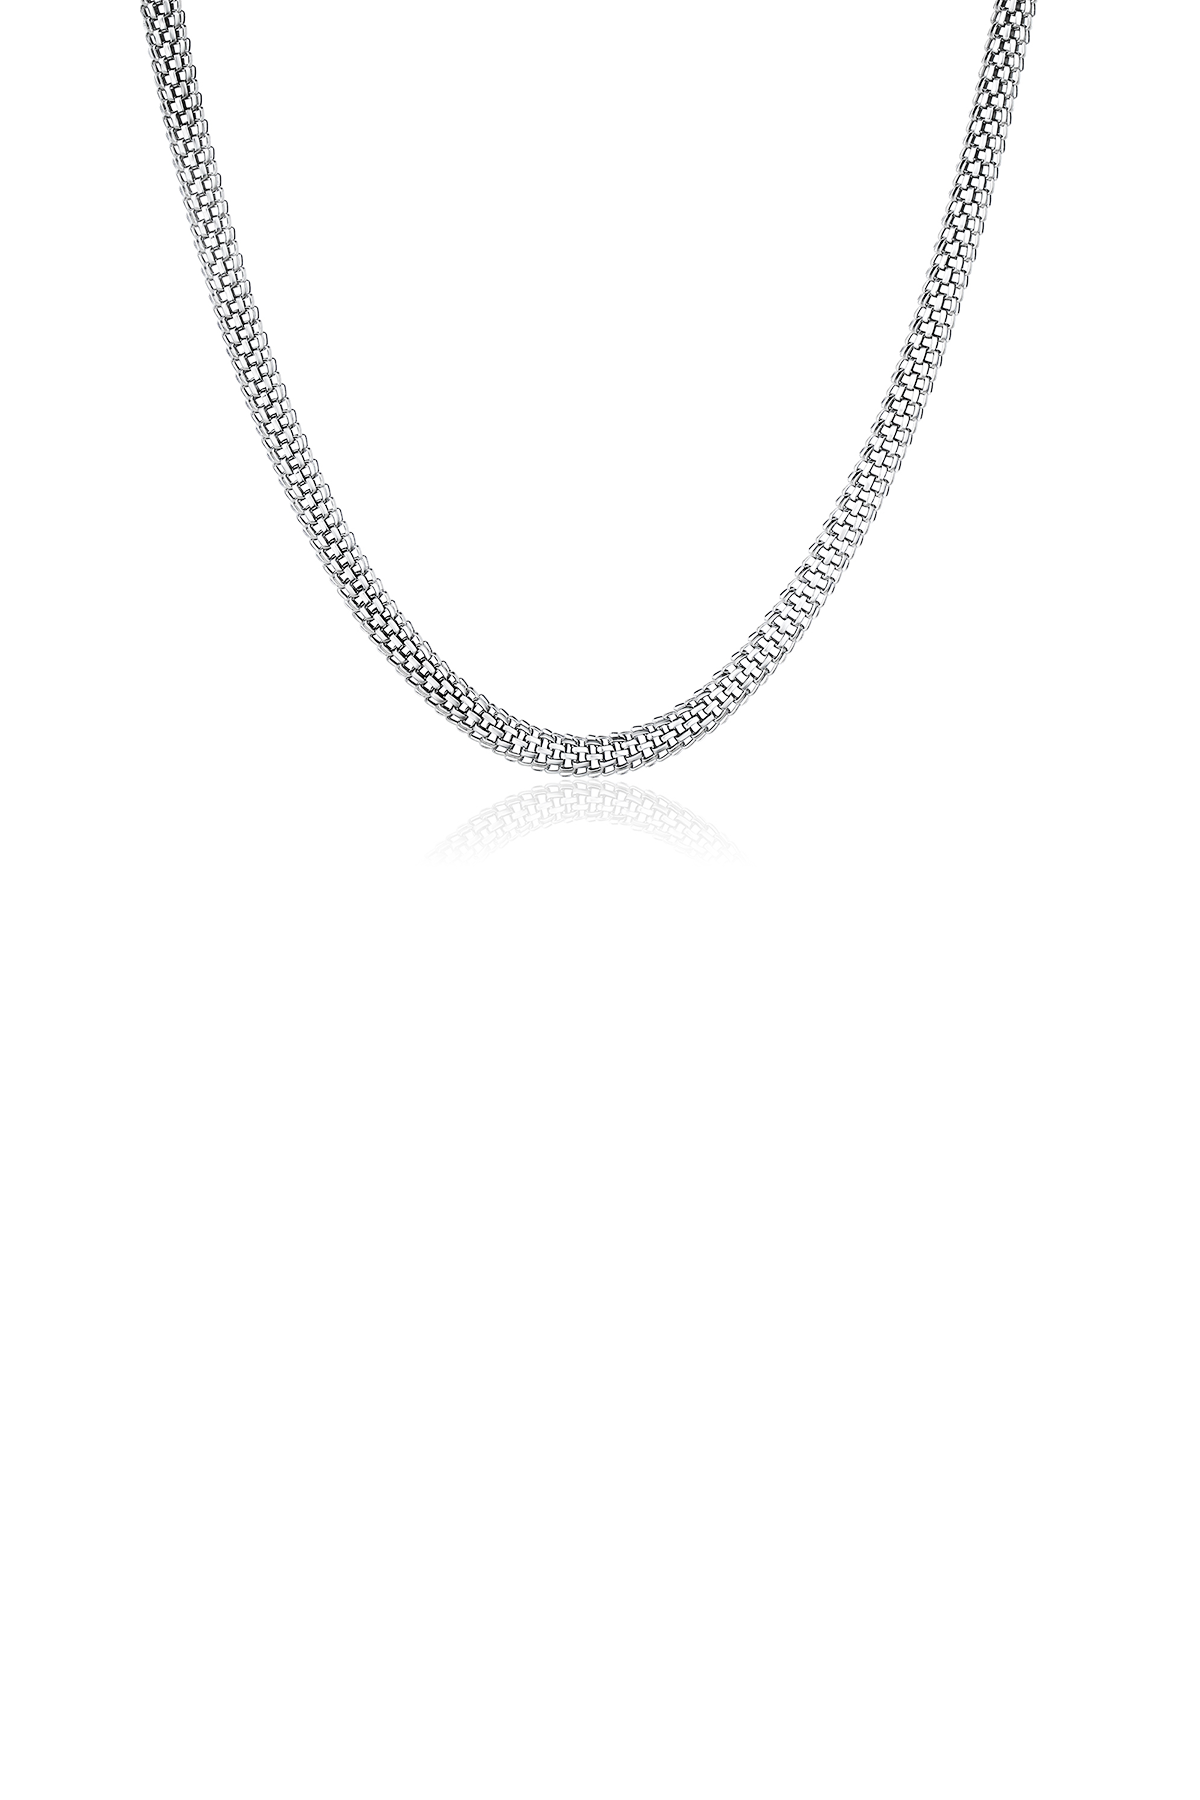 Cable necklace, silver - 3 mm